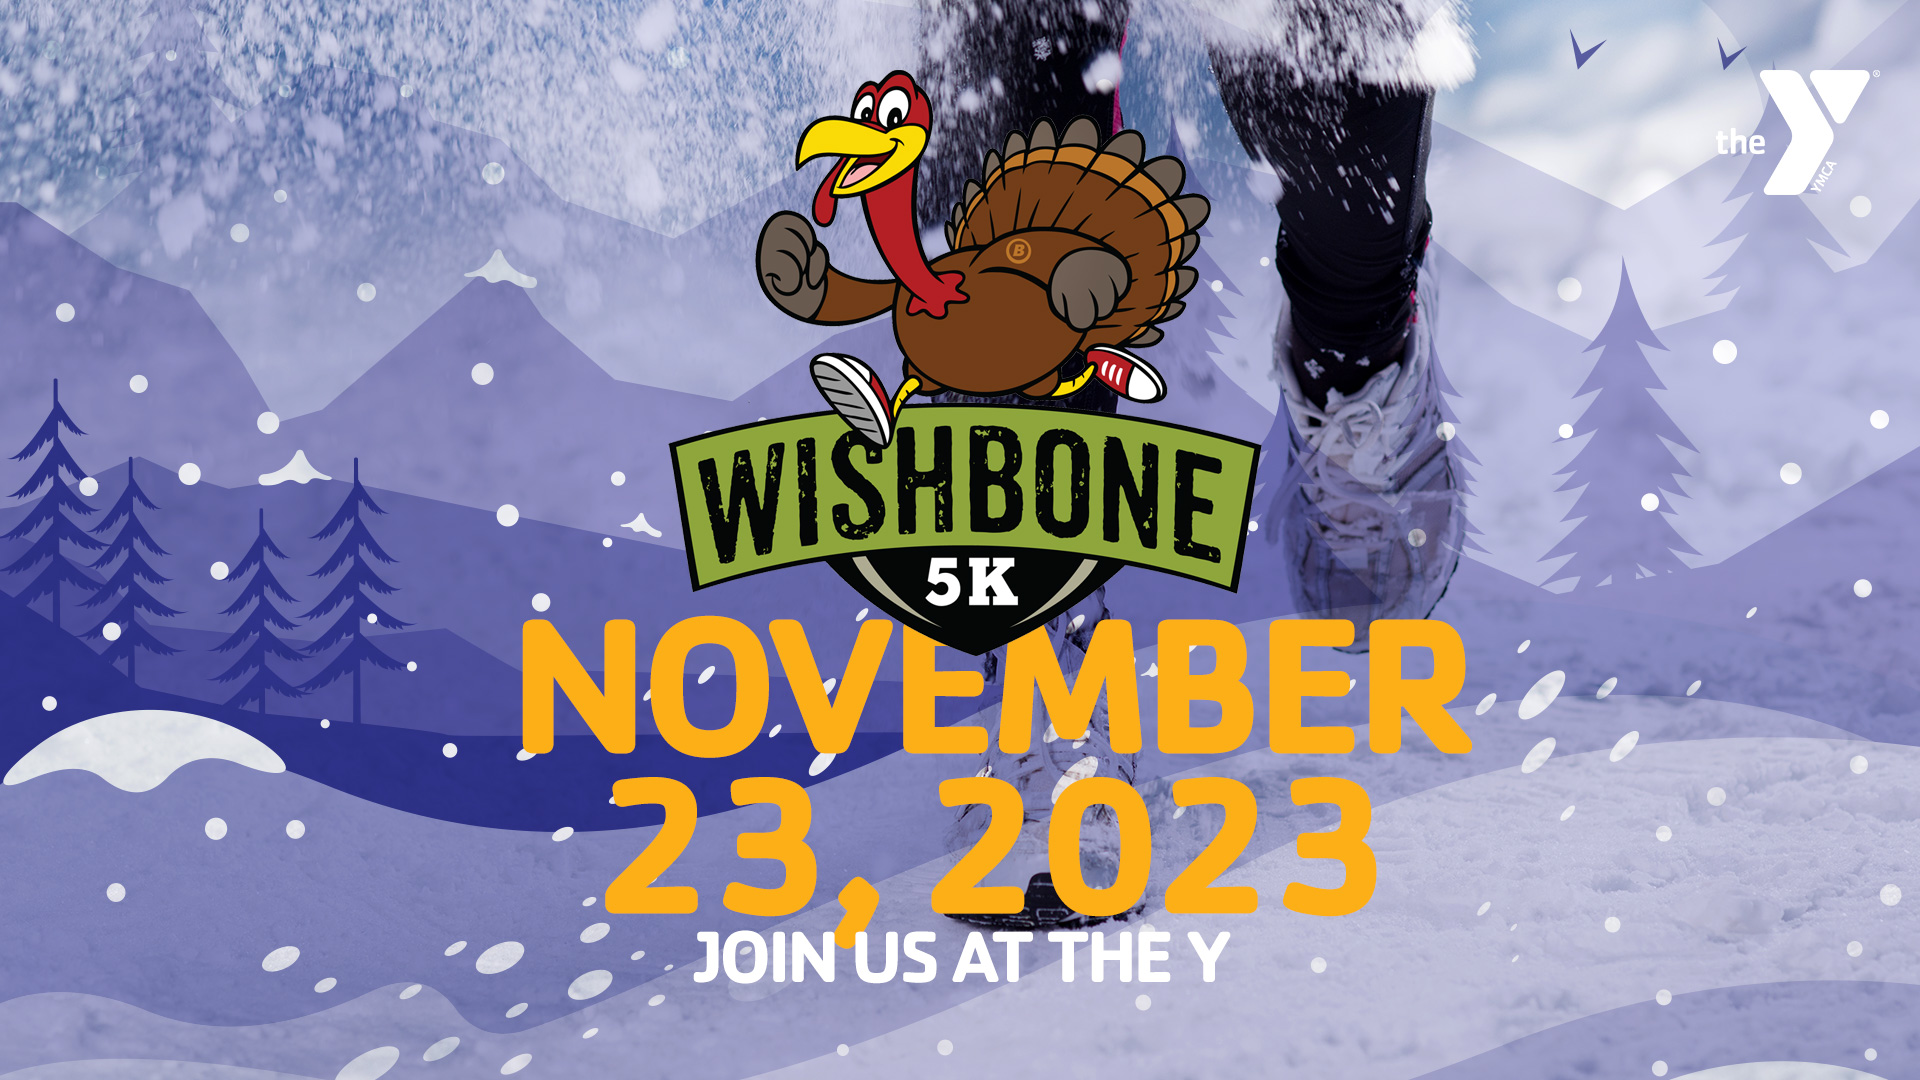 Featured image for “Wishbone 5K”